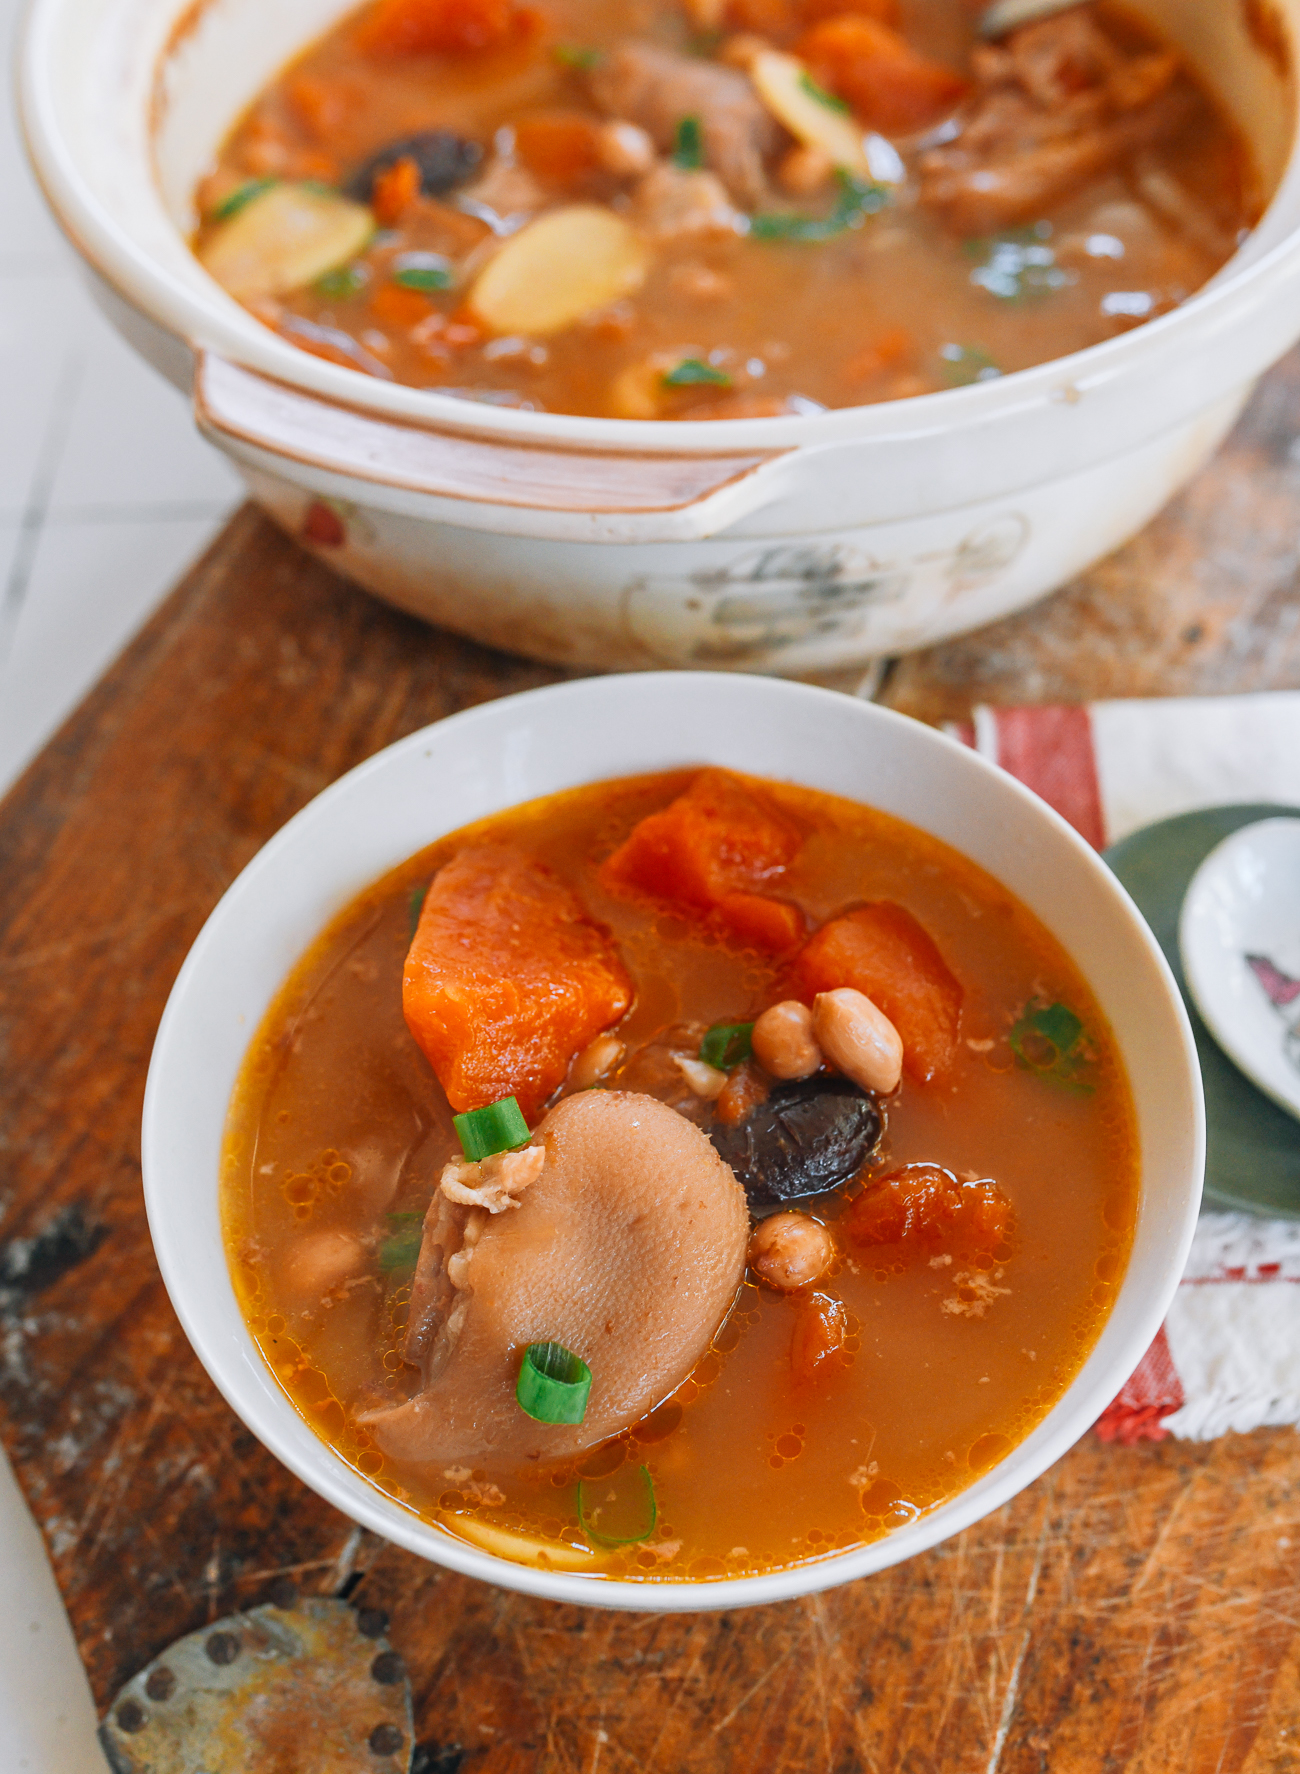 Chinese papaya soup with pig feet, ginger, peanuts, dates, and goji berries